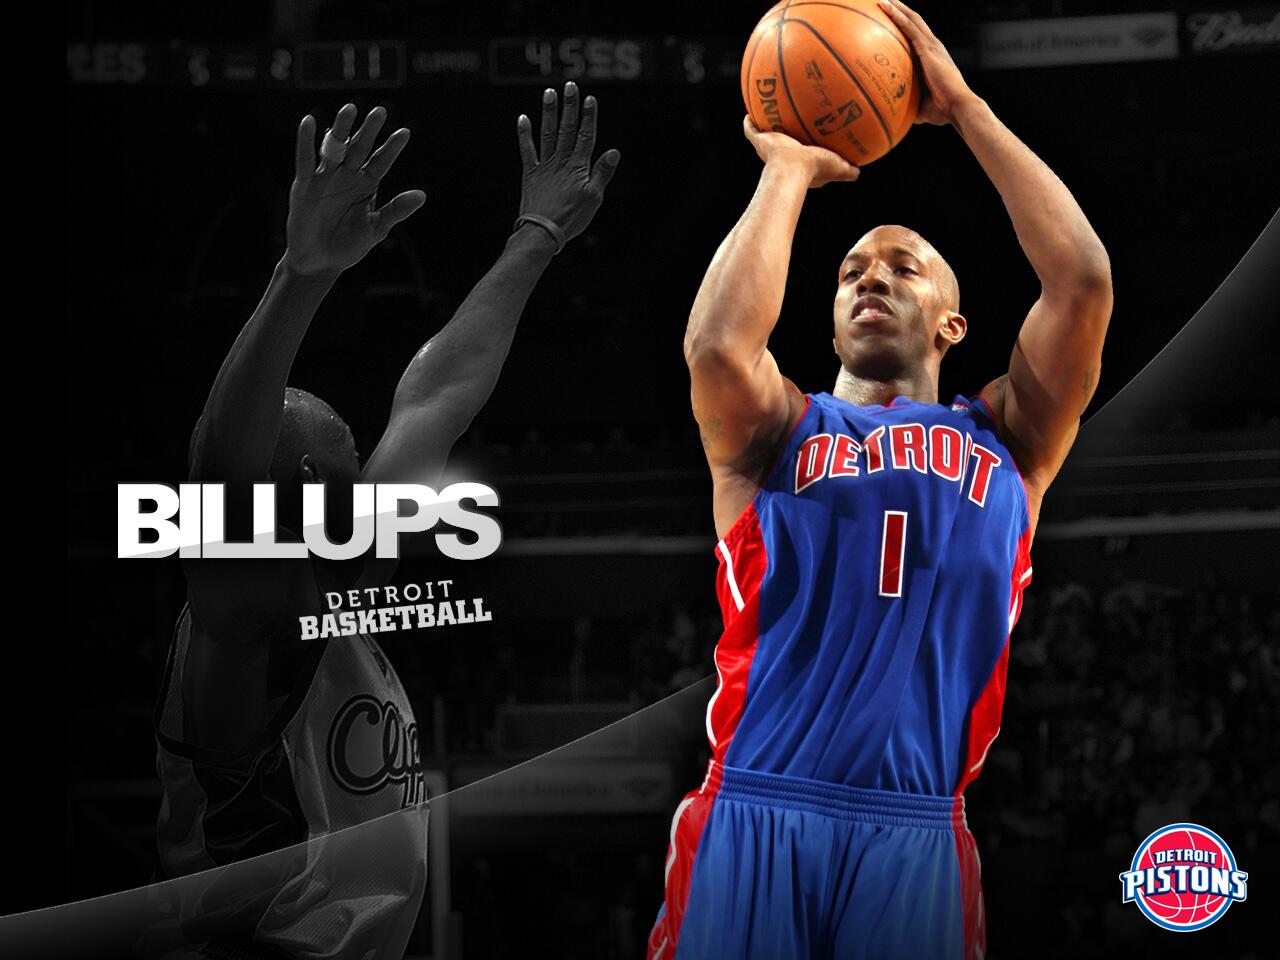 X 上的Detroit Pistons：「Like this Chauncey Billups wallpaper? Download it (and others) here! 」